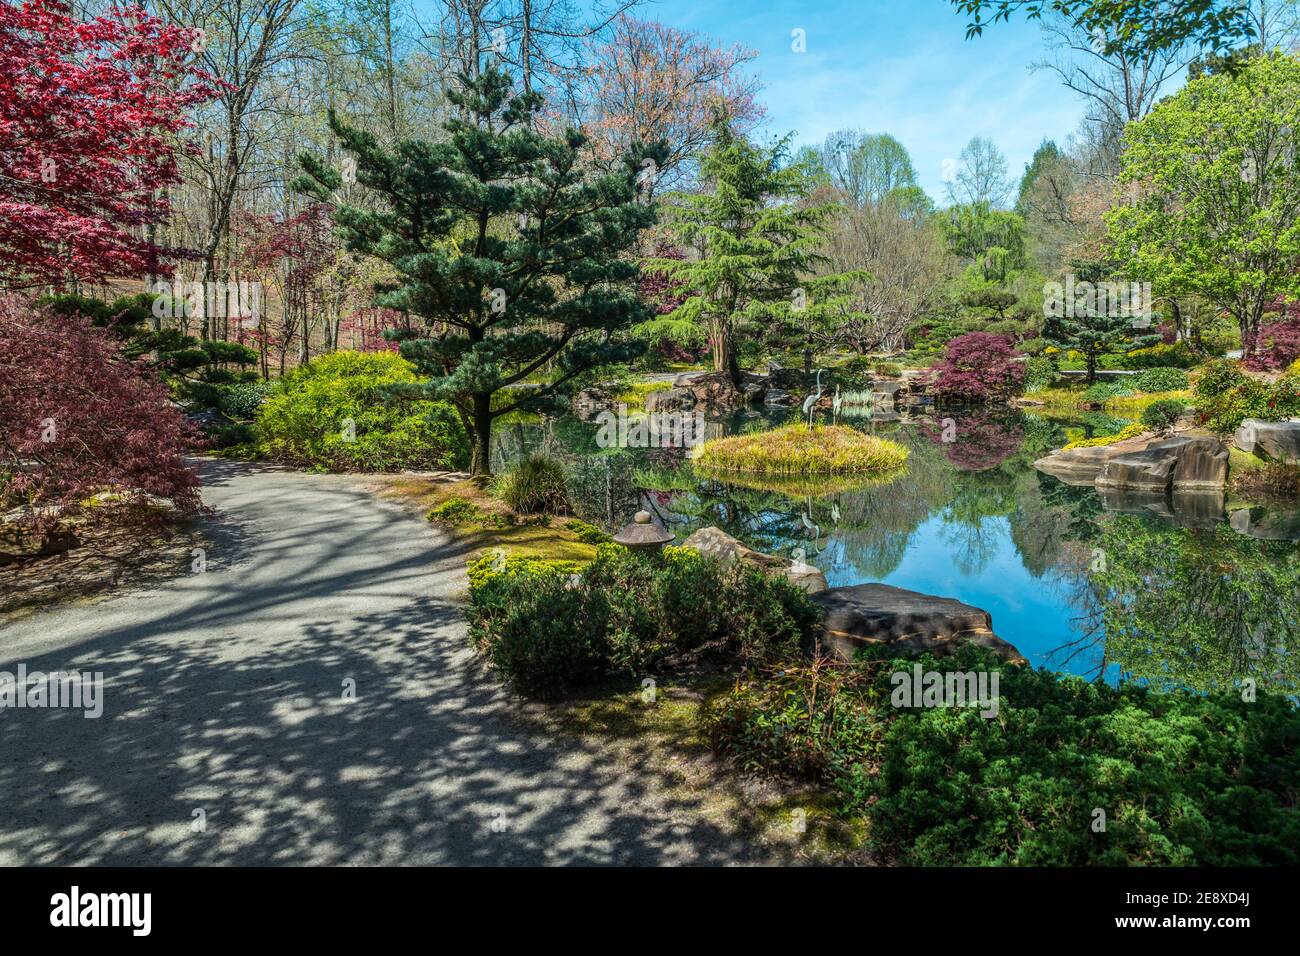 Beautiful Japanese garden with trails going around the pond full of variety of plants trees and statues with the foliage and flowers emerging on a bri Stock Photo